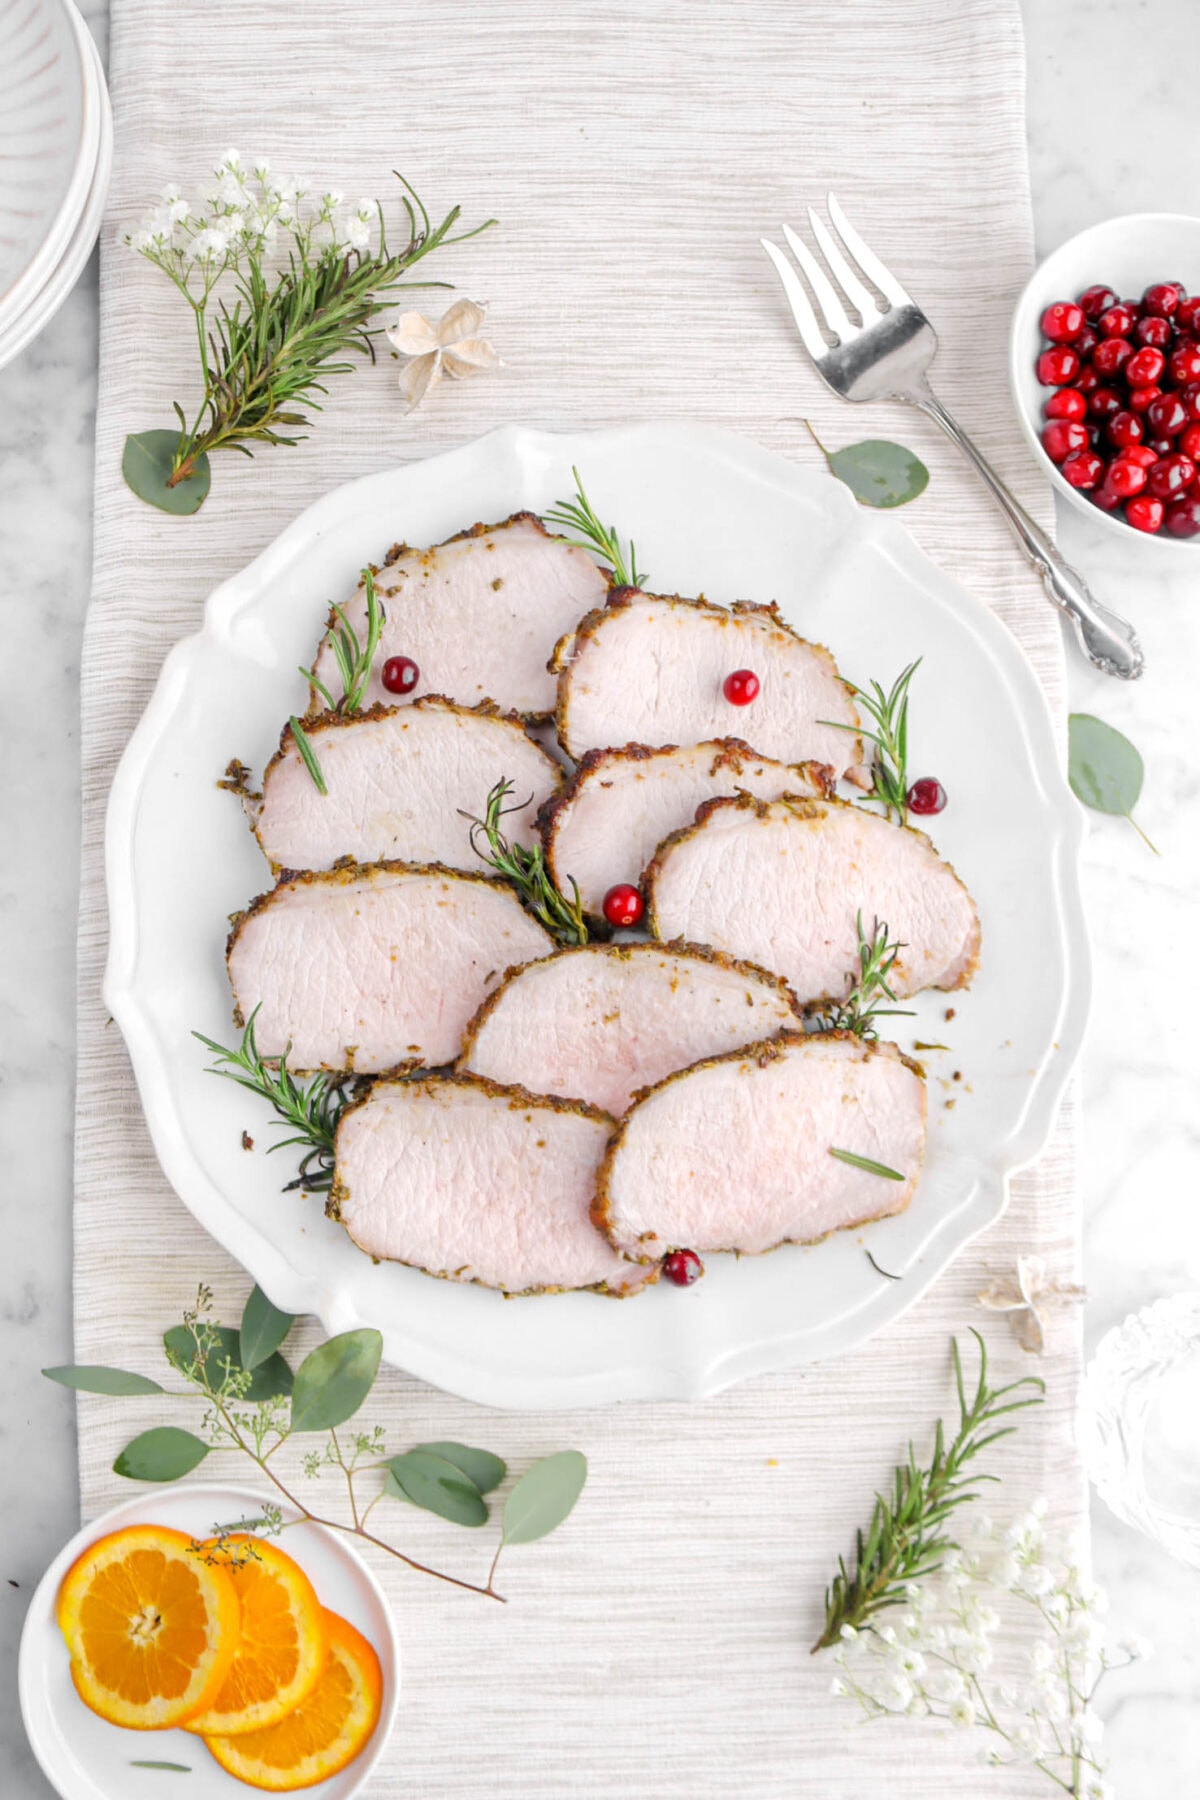 nine slices of pork on round platter with rosemary sprigs and cranberries.